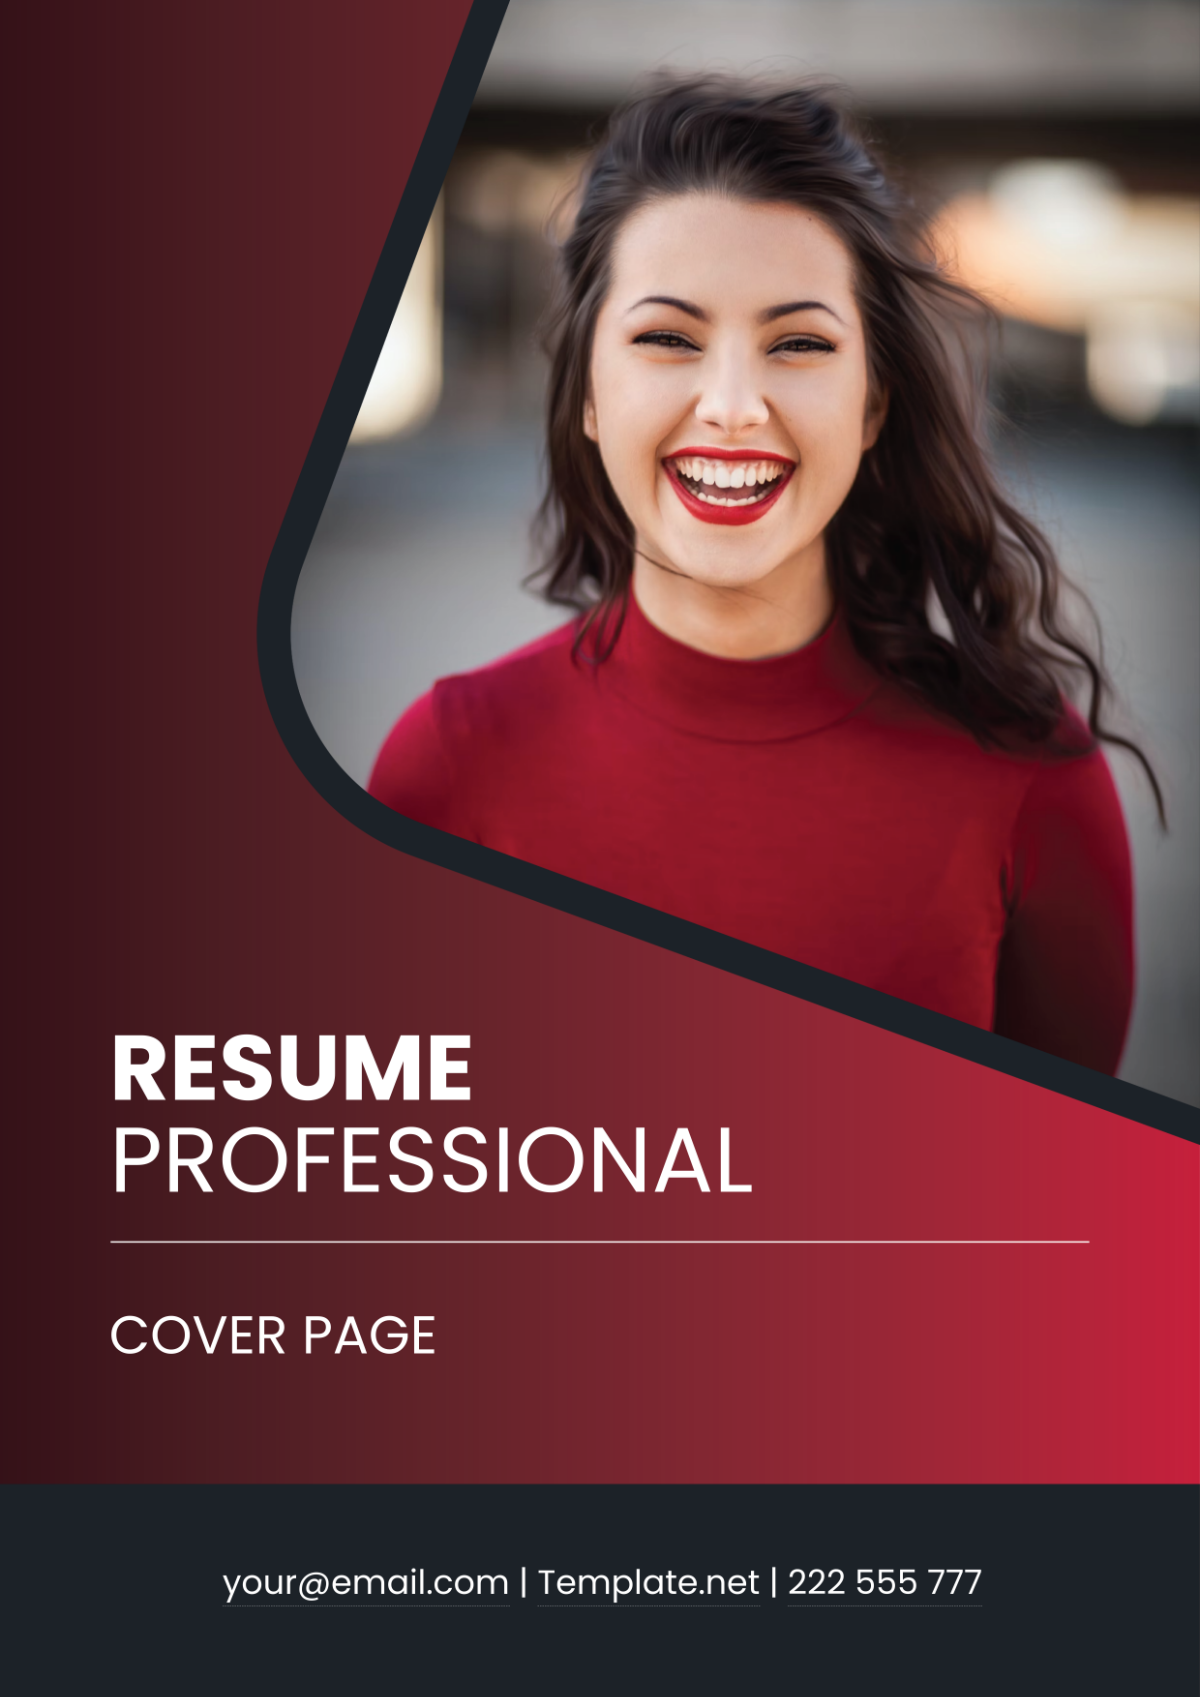 Free Resume Professional Cover Page Template